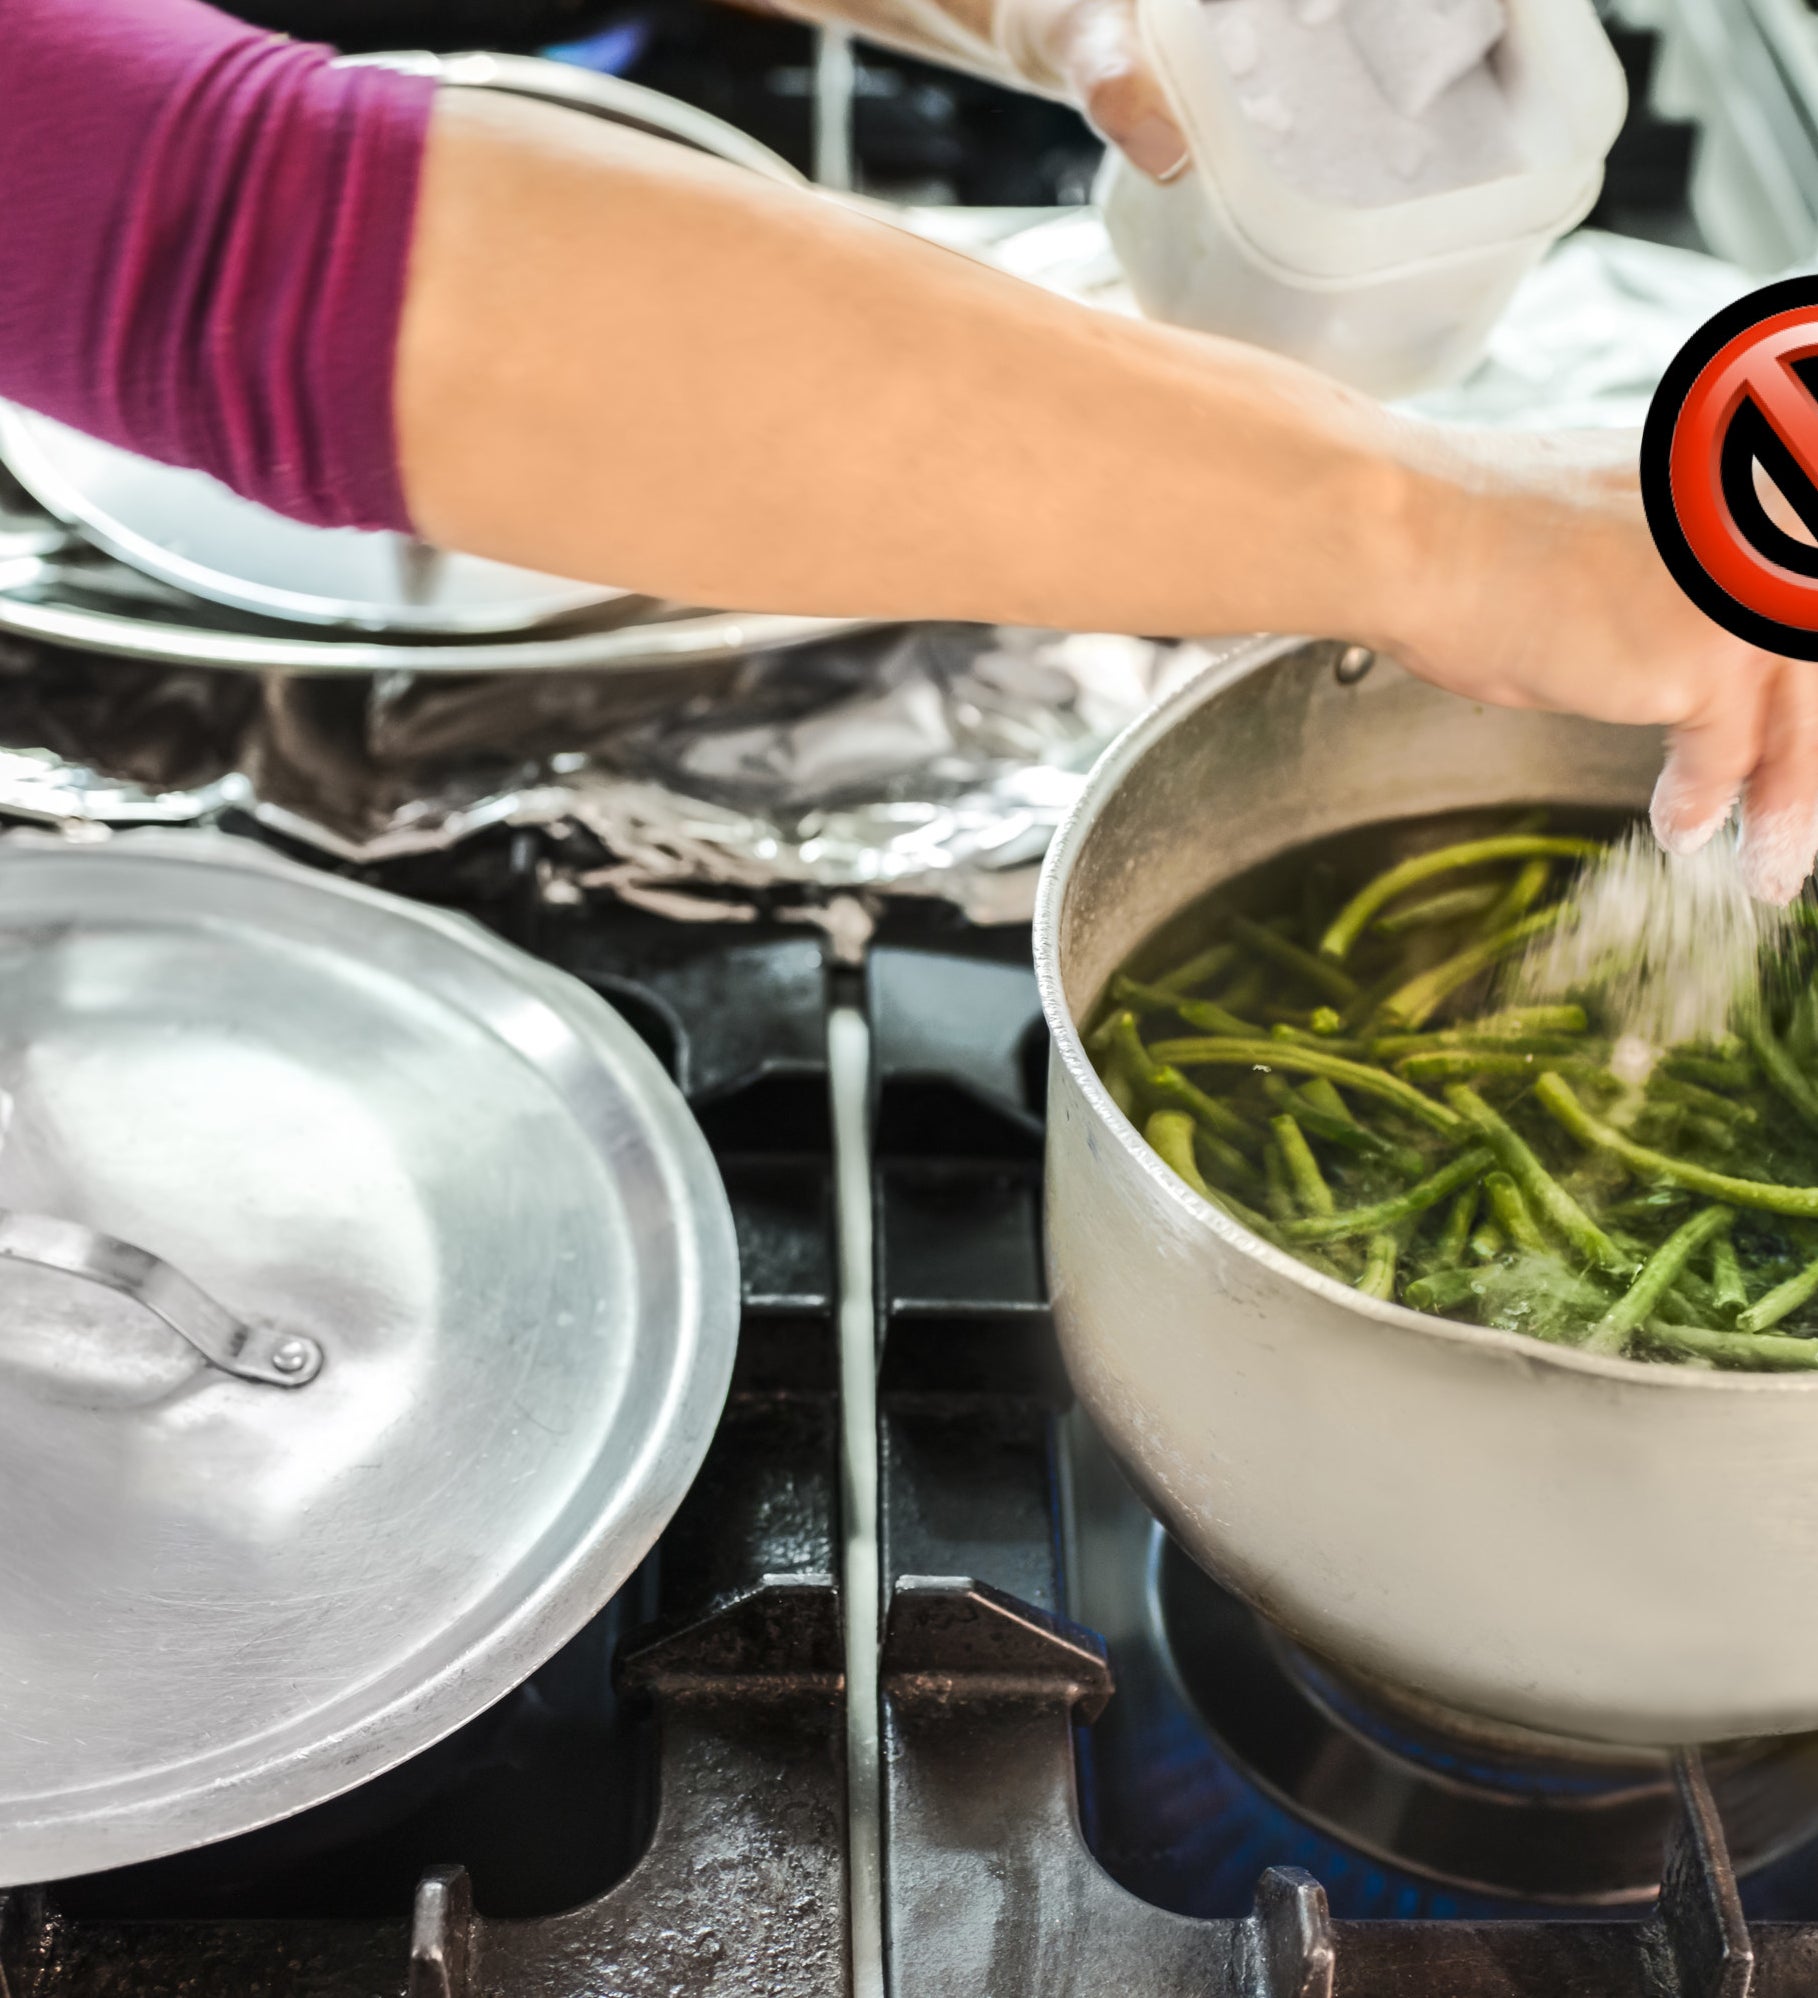 &#x27;no&#x27; sign while someone seasons a pot of boiling green beans with salt